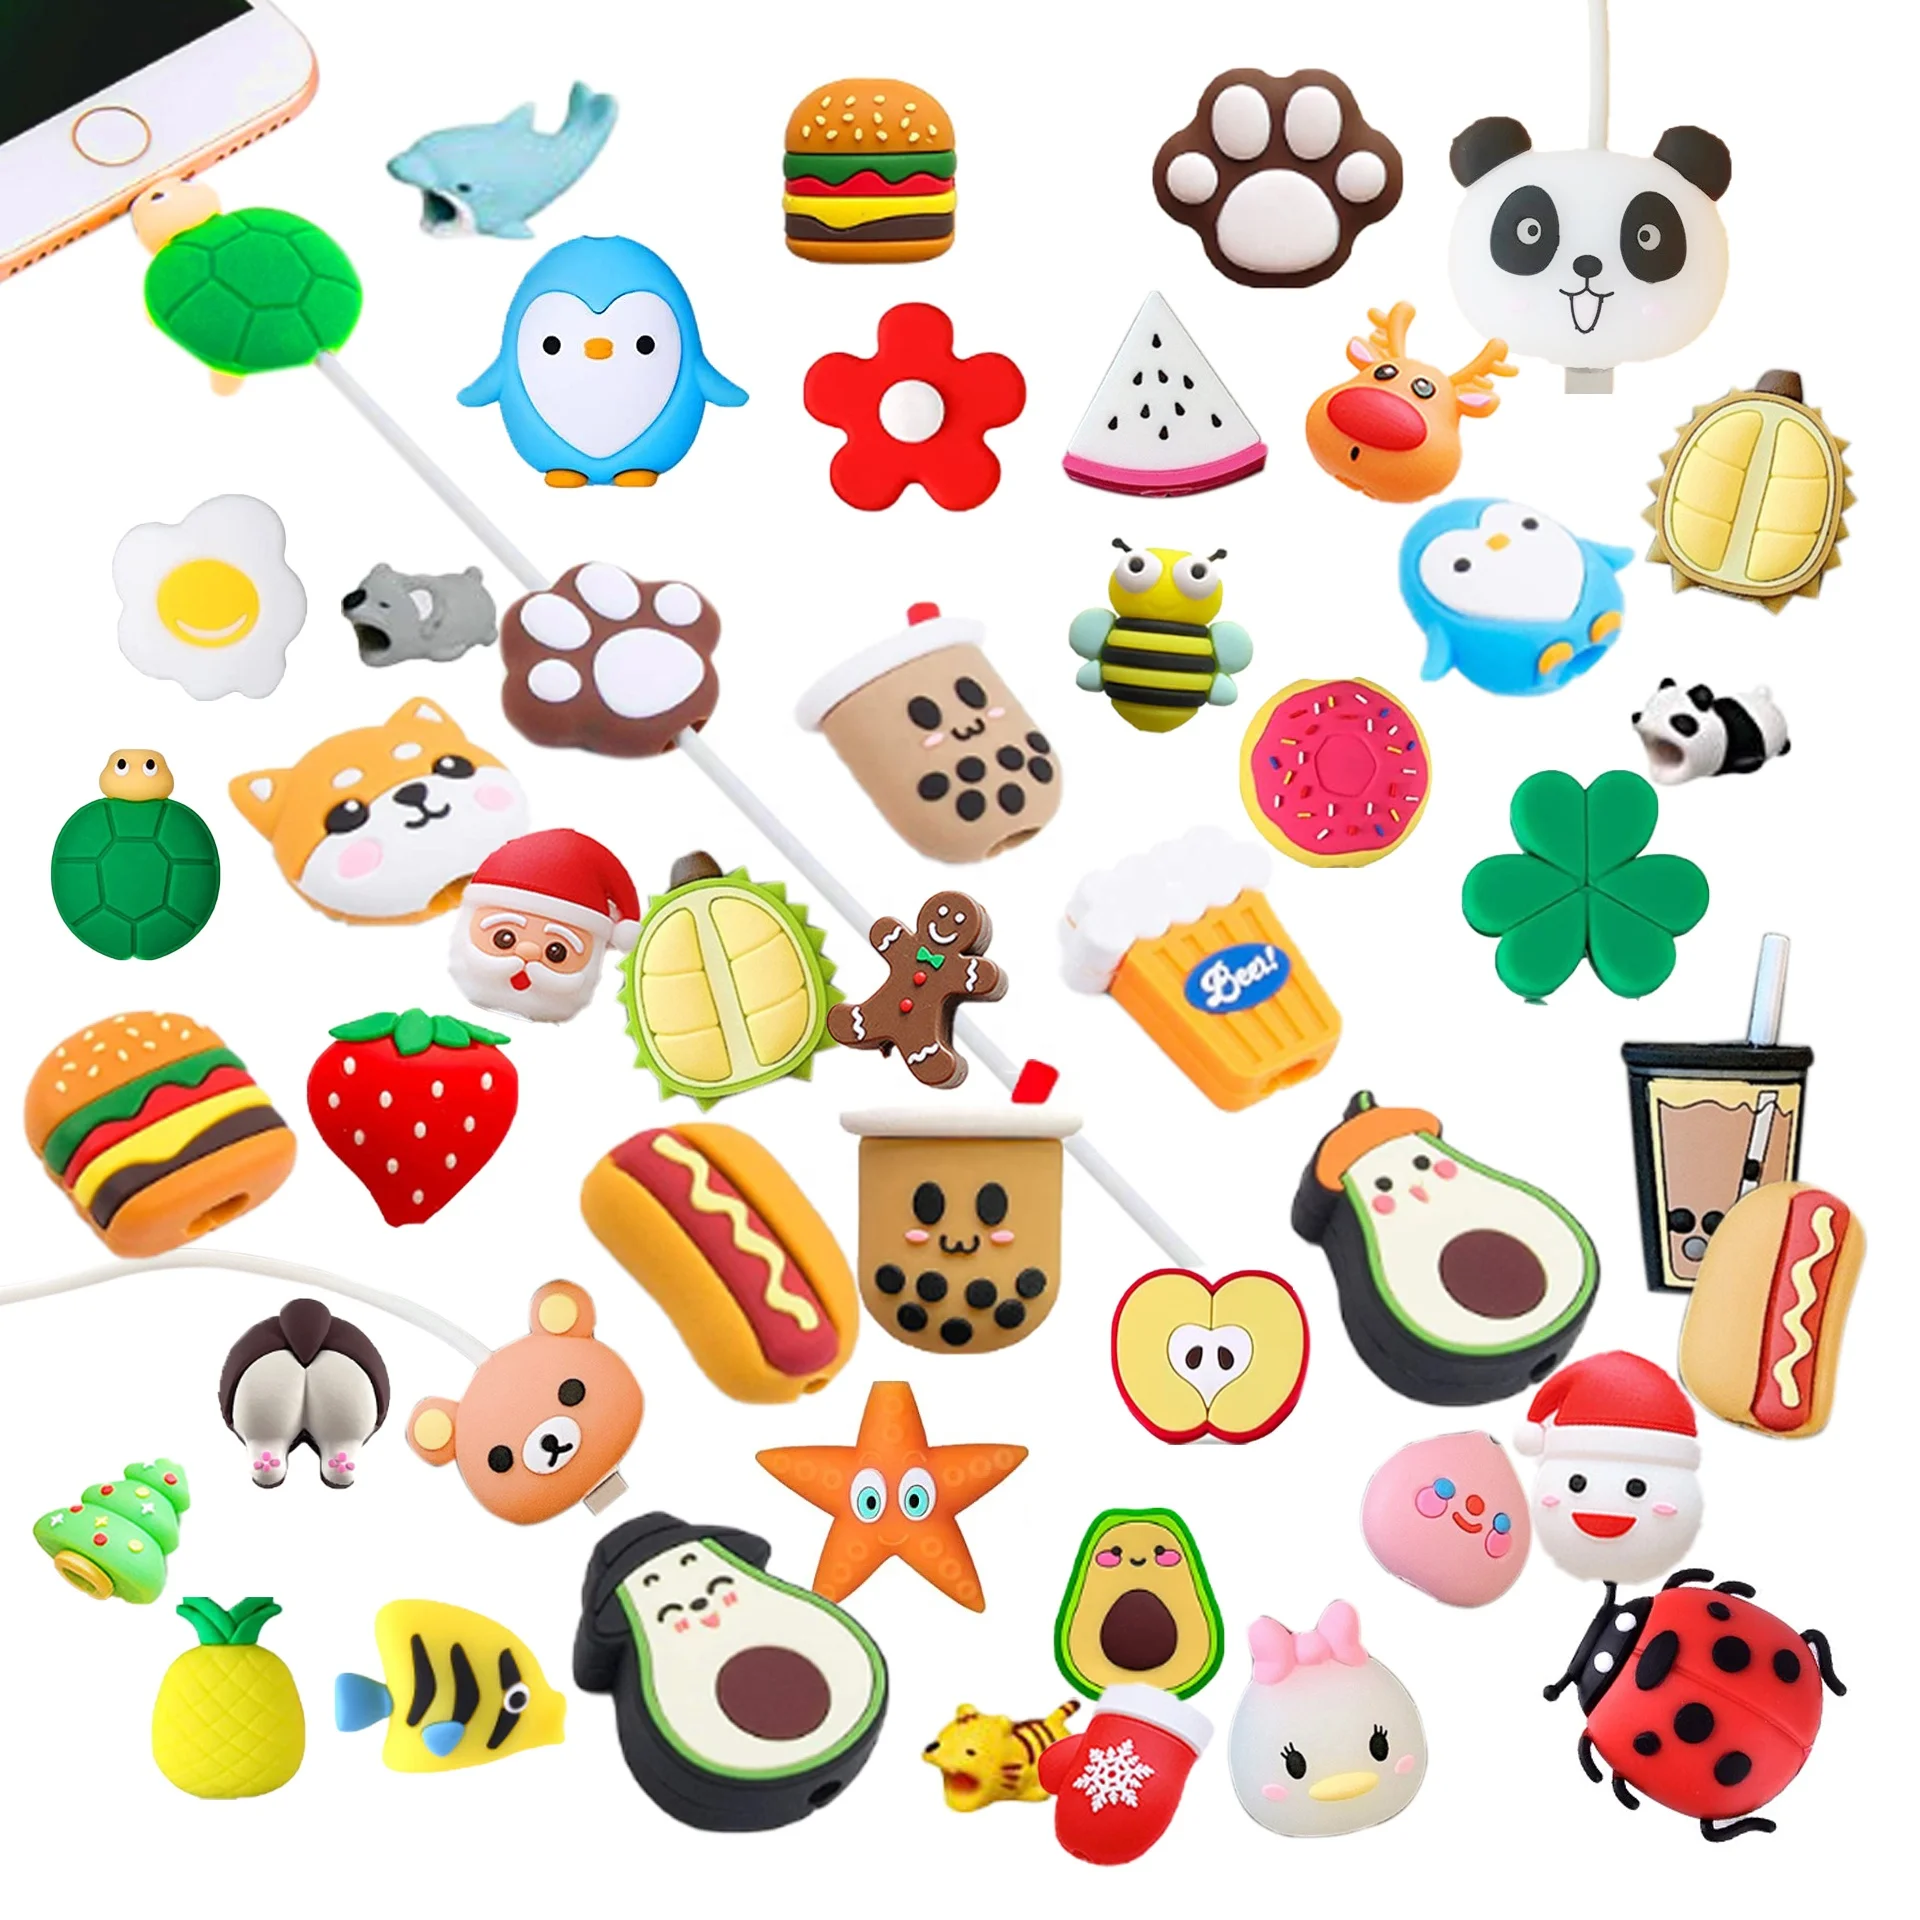 200+ Style Fruit Animal Shape Cable Protector For Iphone Charger Cable,Cute  Charger Cartoon Christmas Gift Usb Cable Protector - Buy Cute Anime Bite Cable  Protector,Cute Kawaii Animals For Phone Charging Cable,Cartoon Animal